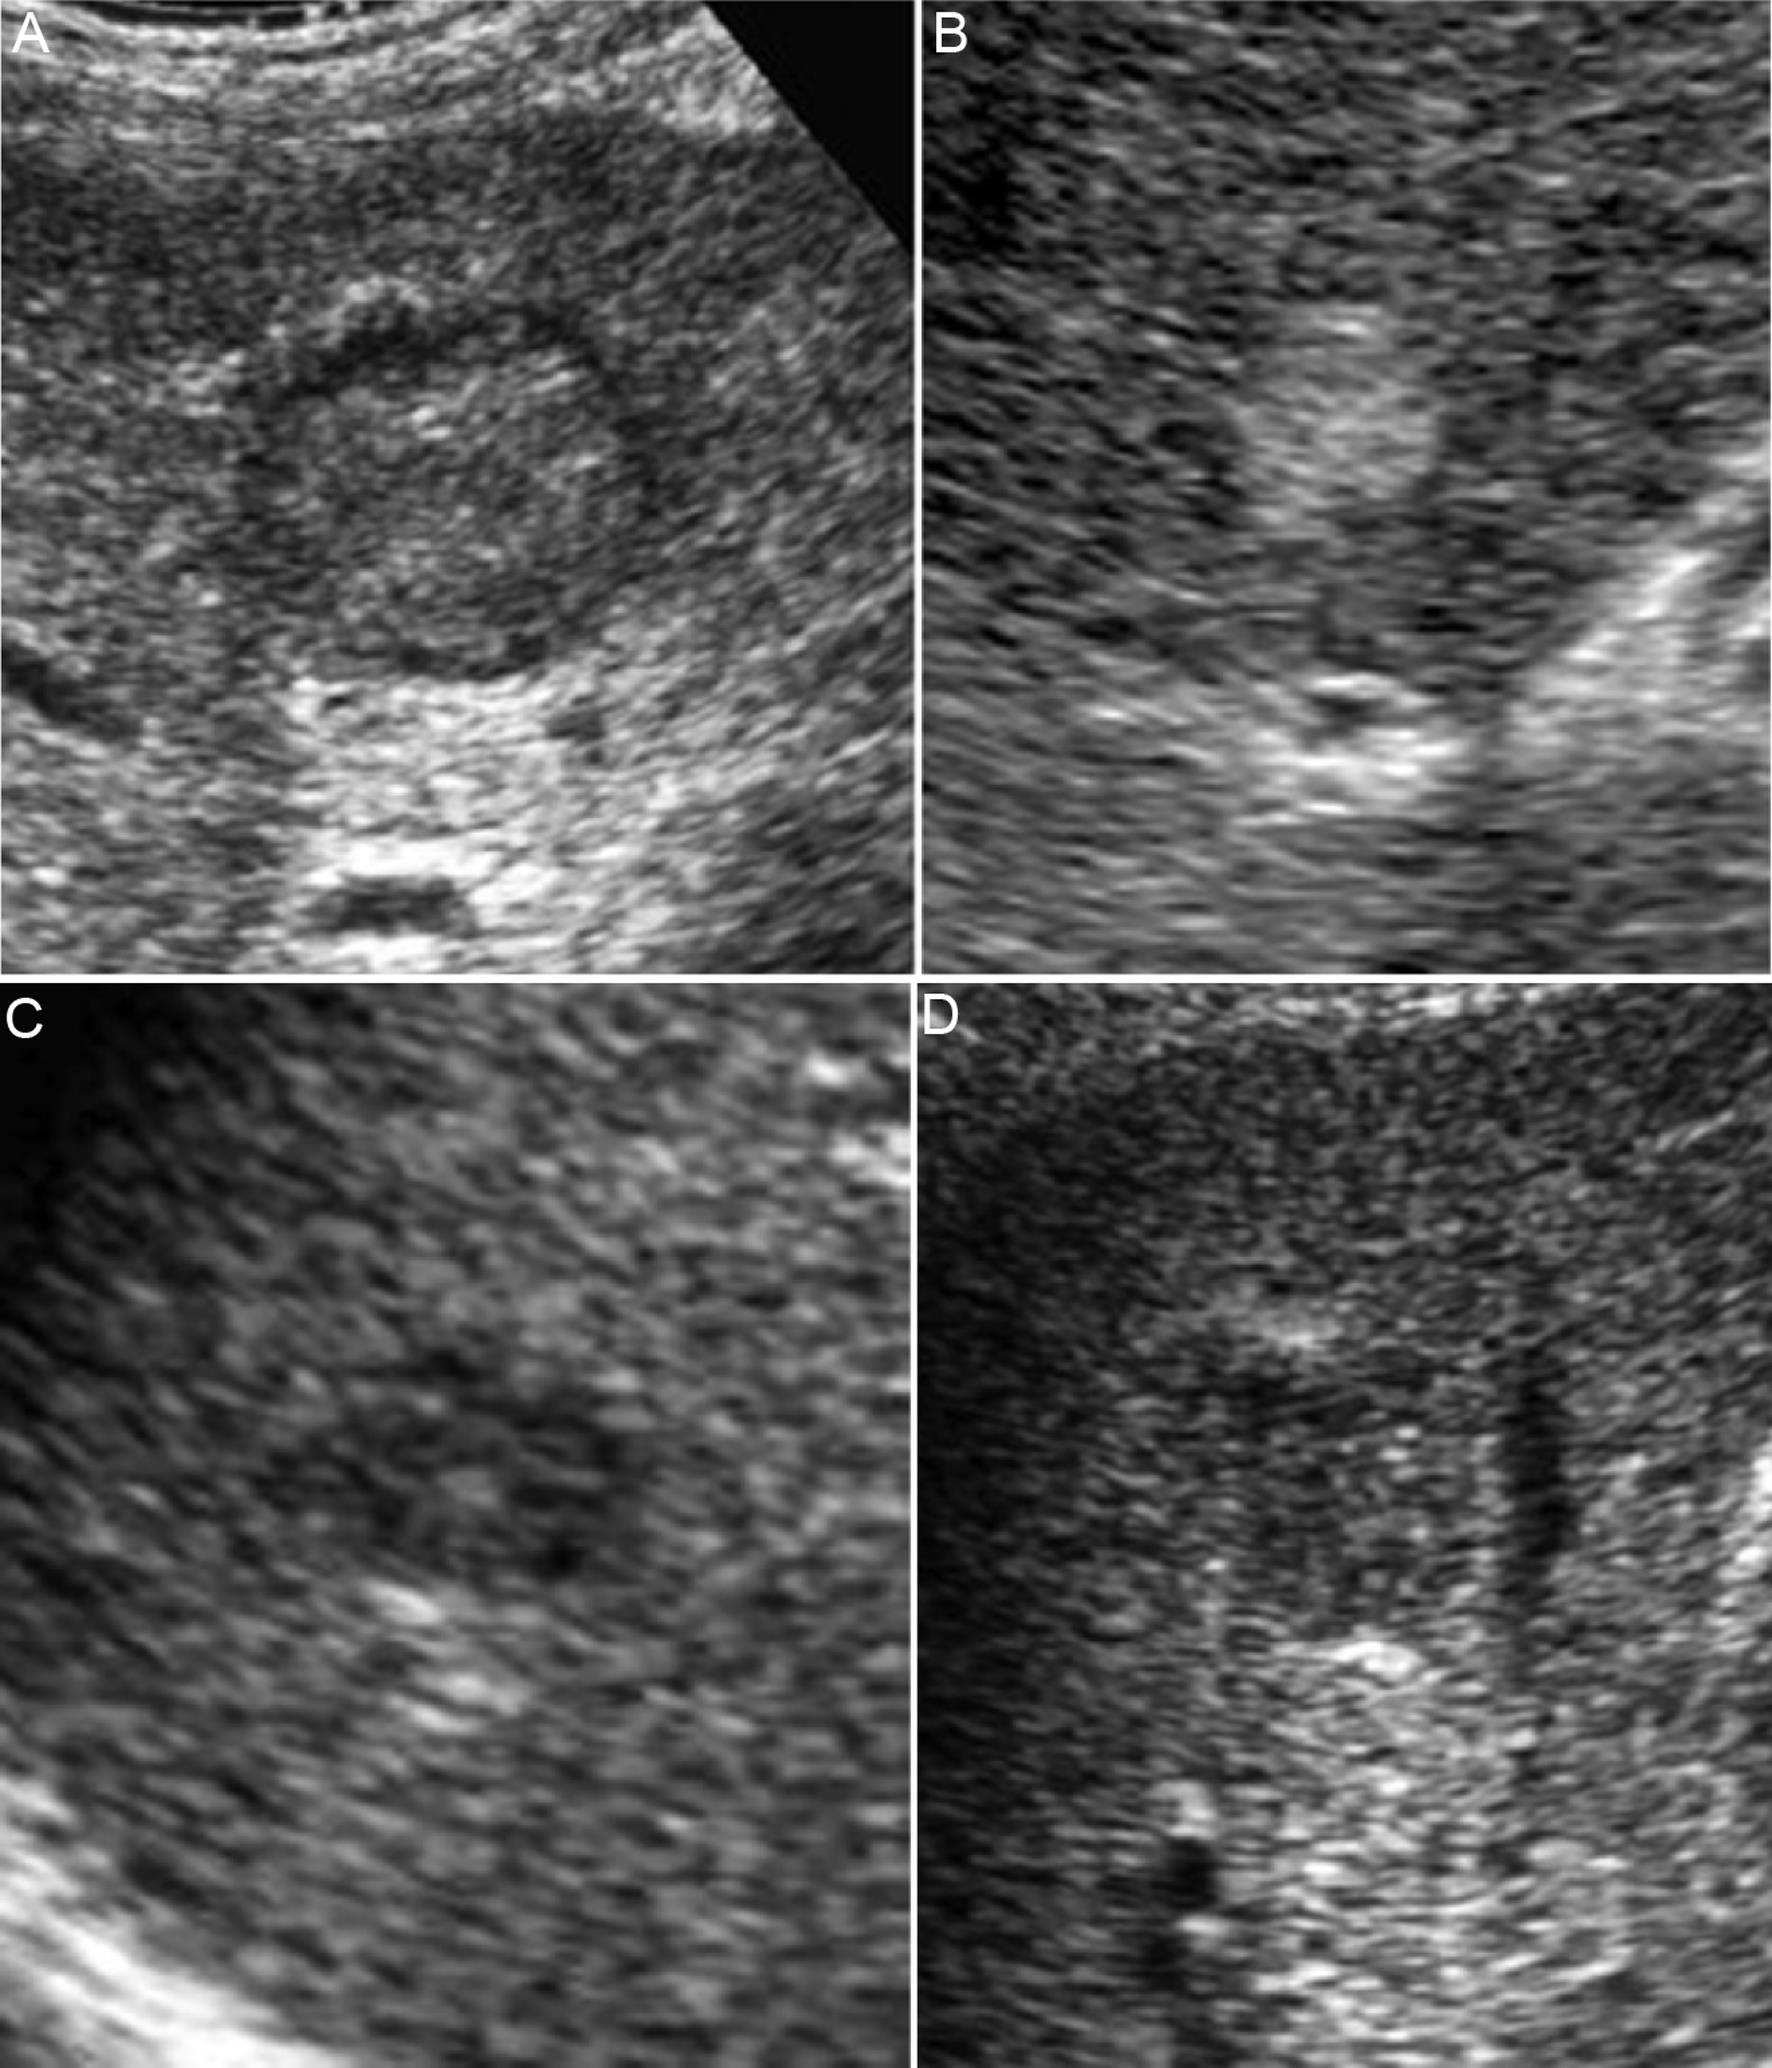 Classification of B-mode ultrasonographic images of small hepatocellular carcinoma.